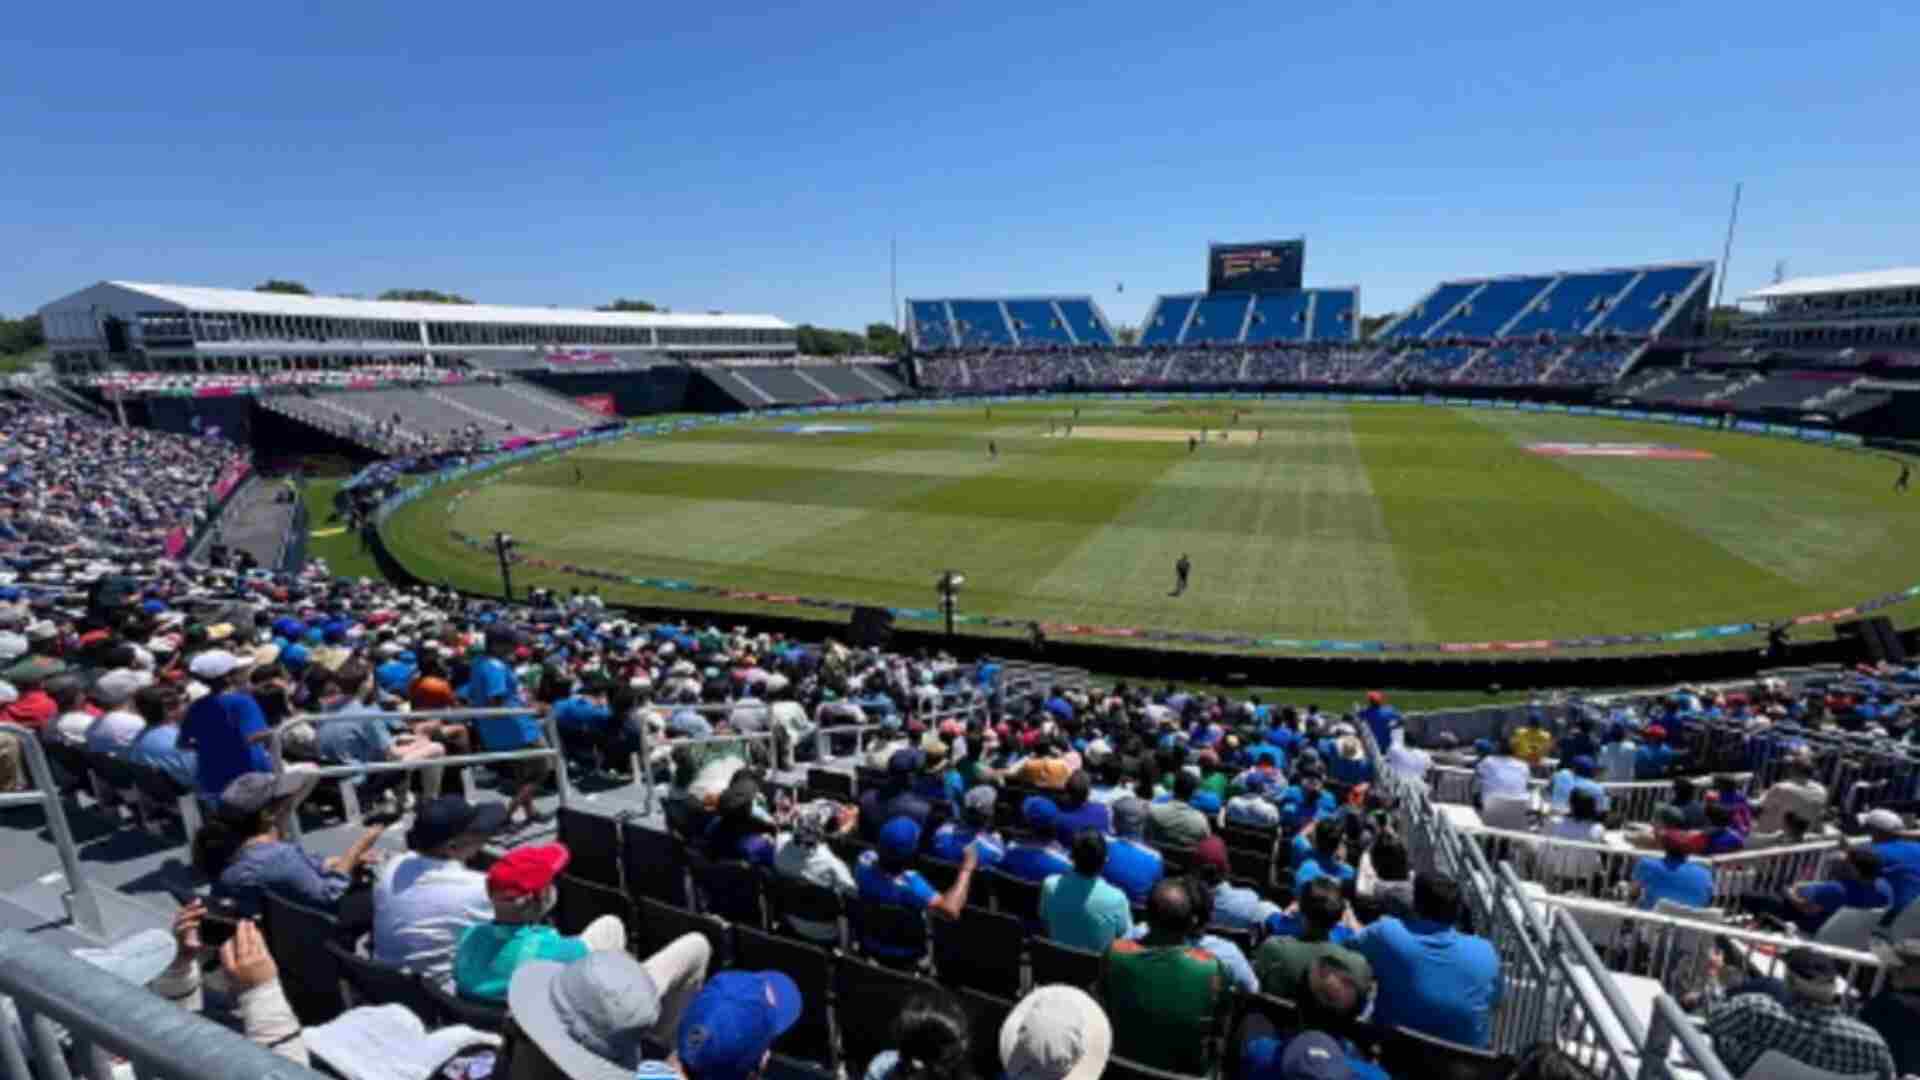 India vs Pakistan T20 World Cup Match In NY, Weather Forecast Predicts ‘Intermittent Clouds